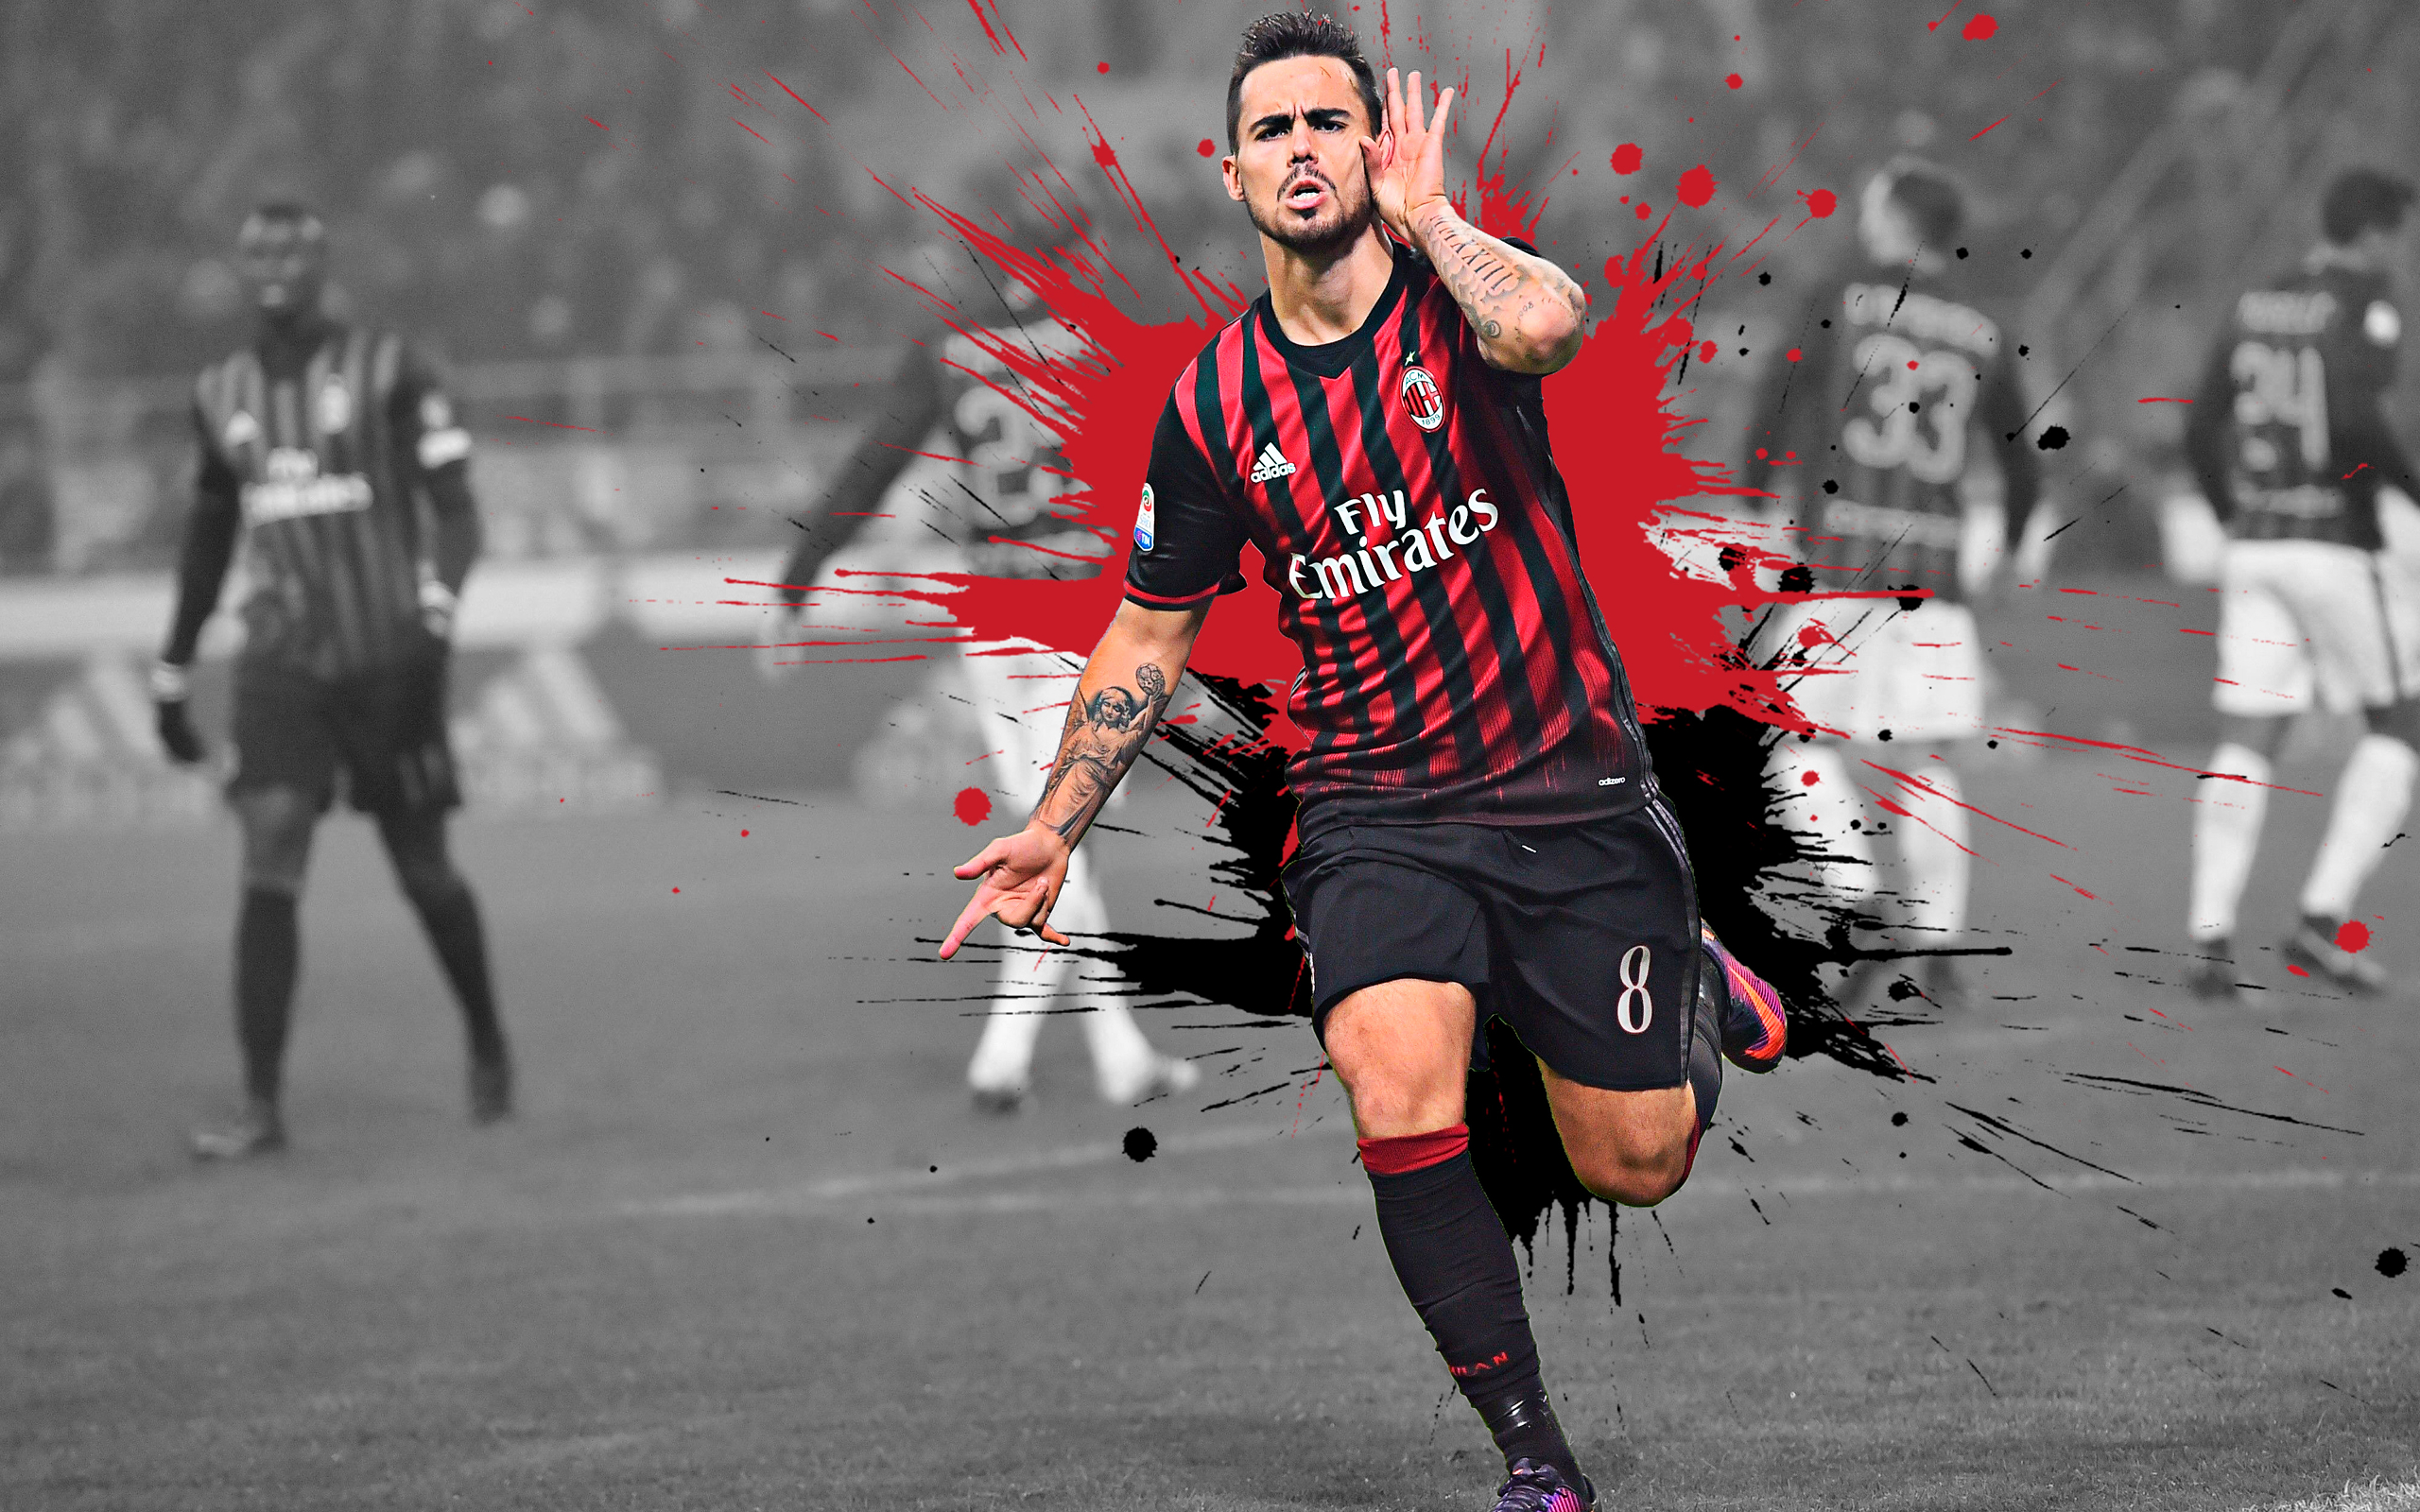 Suso Wallpapers